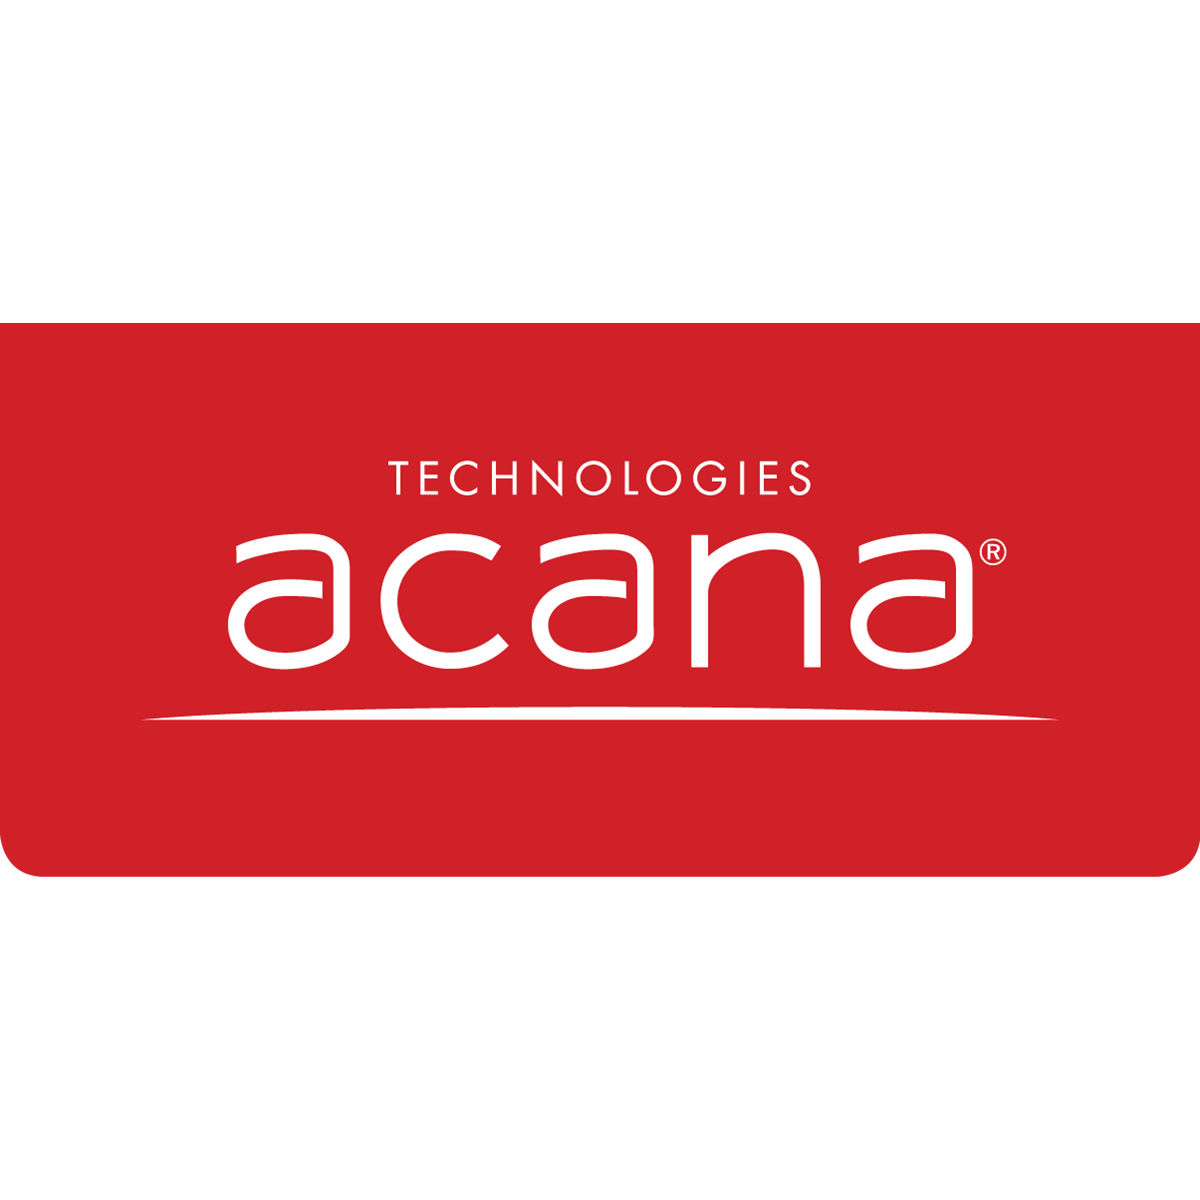 Where to buy Acana Products